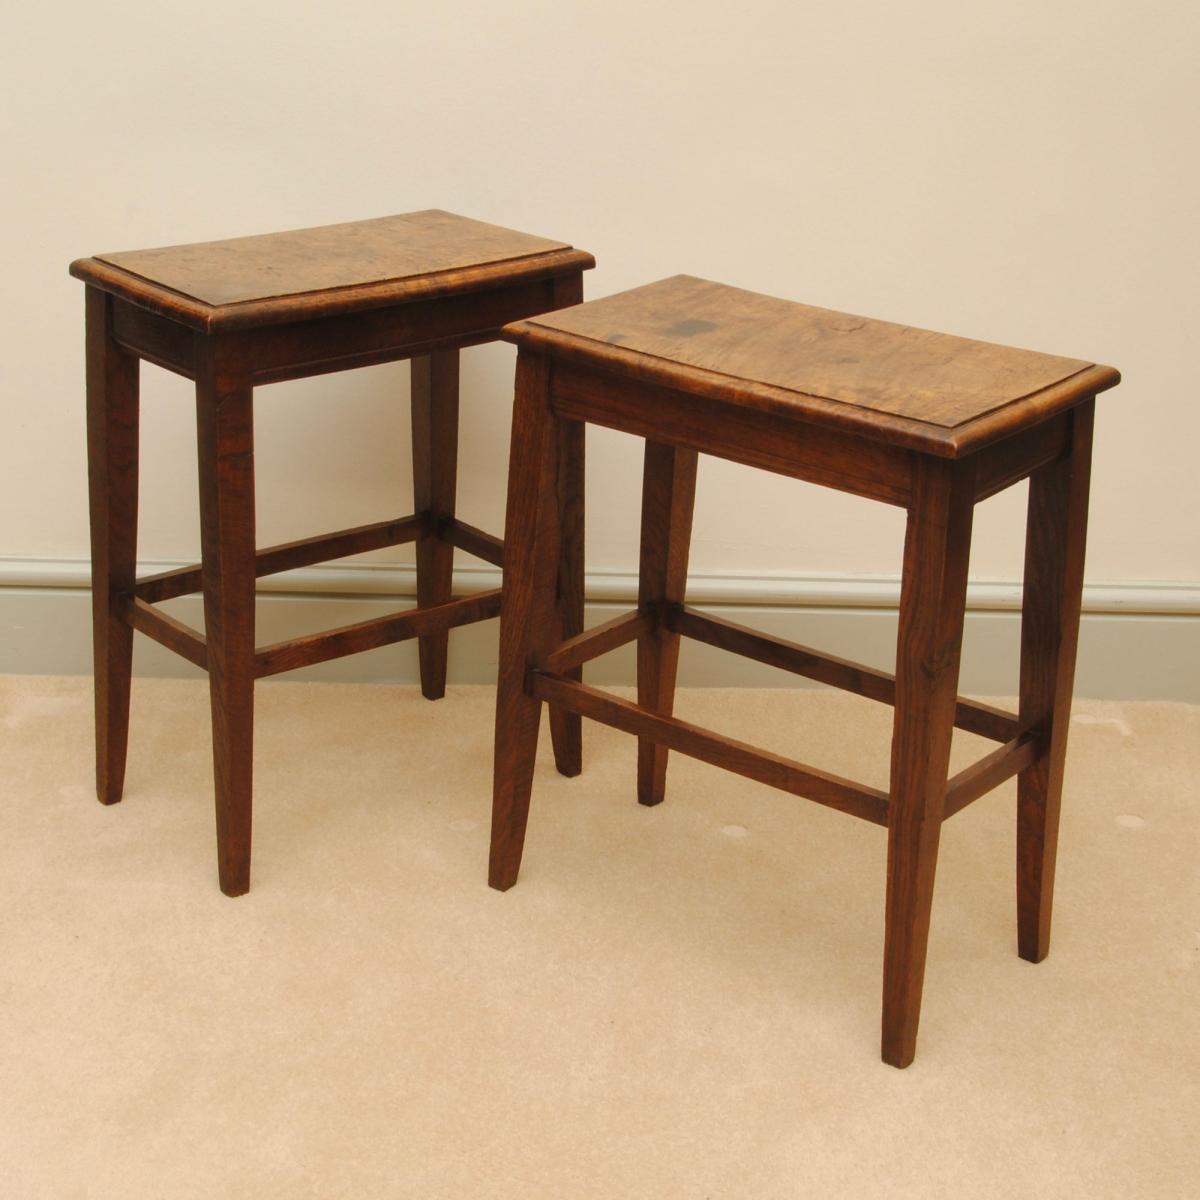 A Pair of Late 18th Century Oak Stools